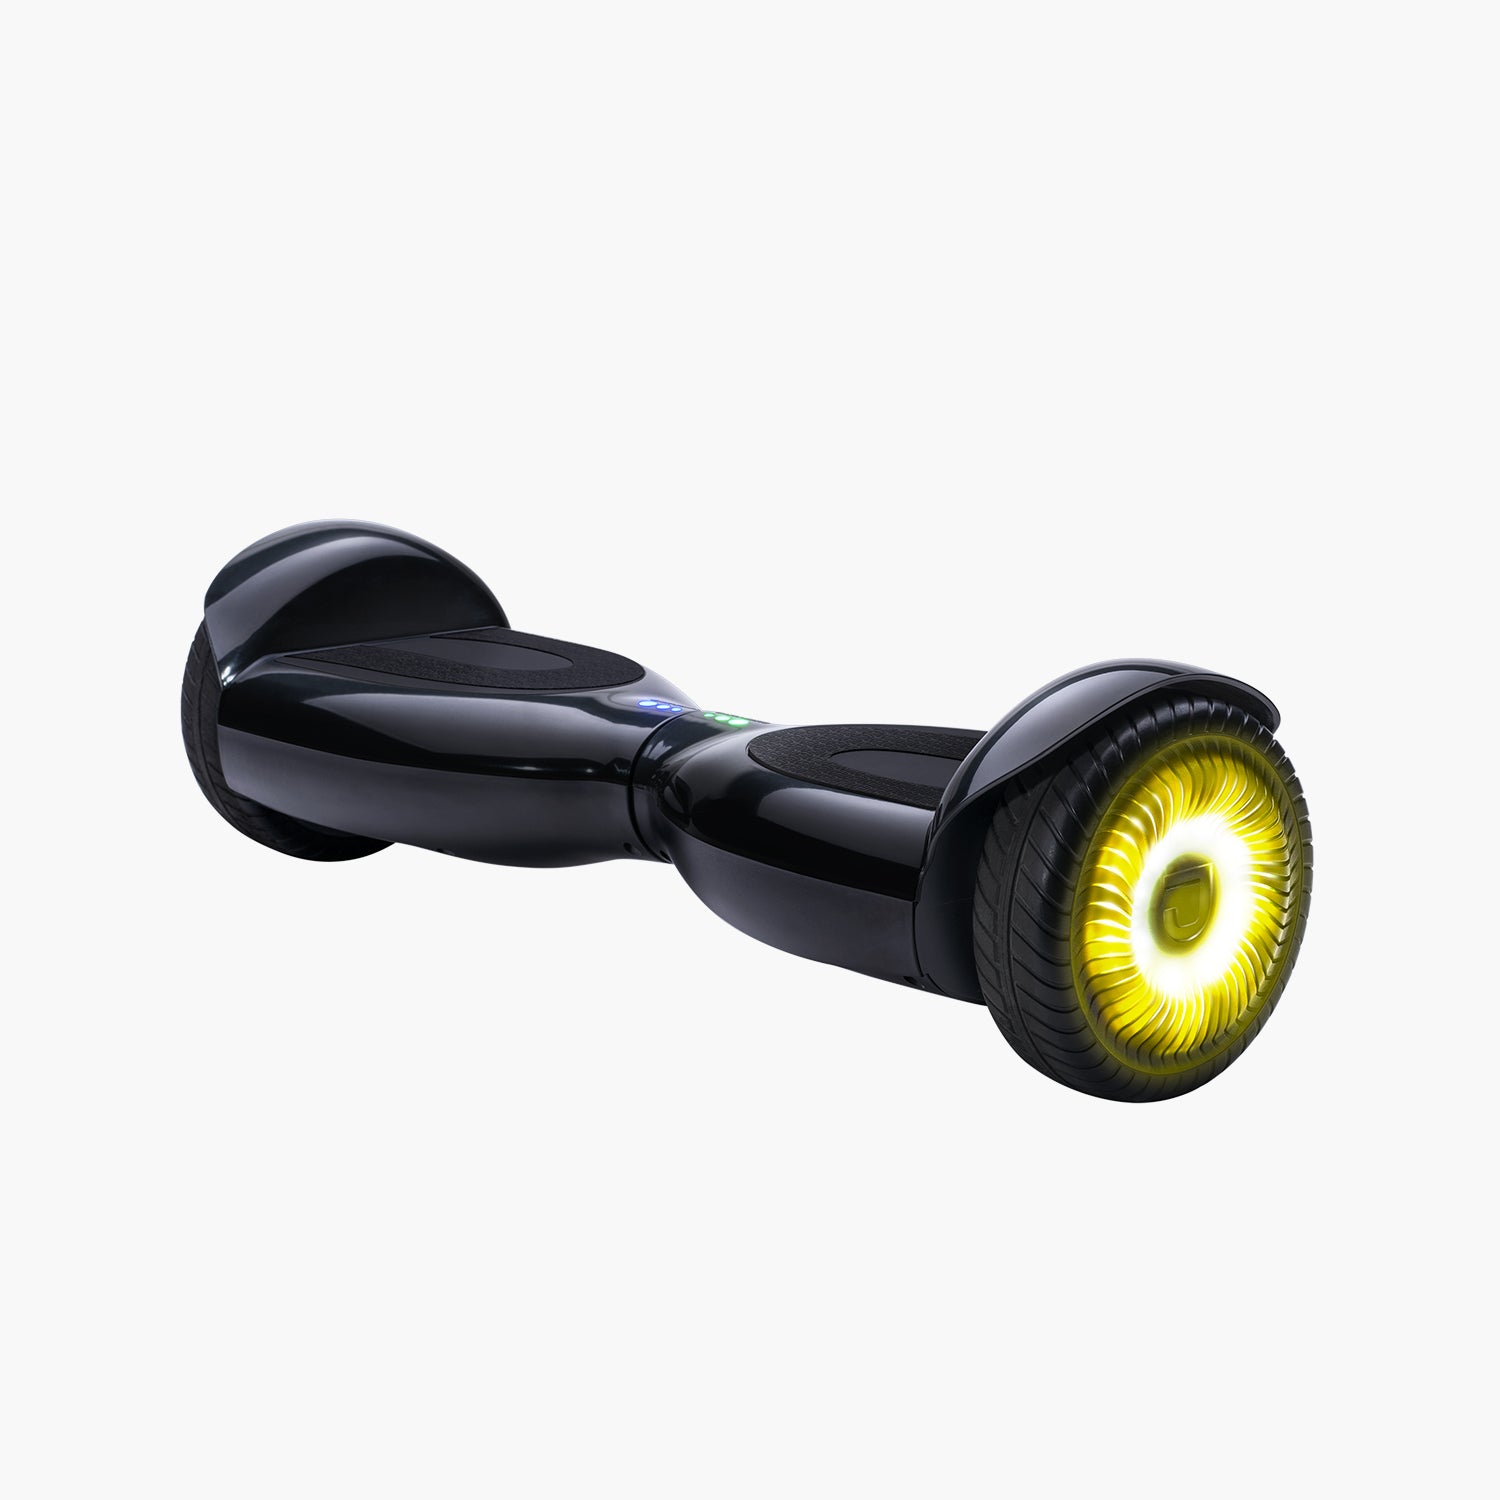 front view of the Zone hoverboard